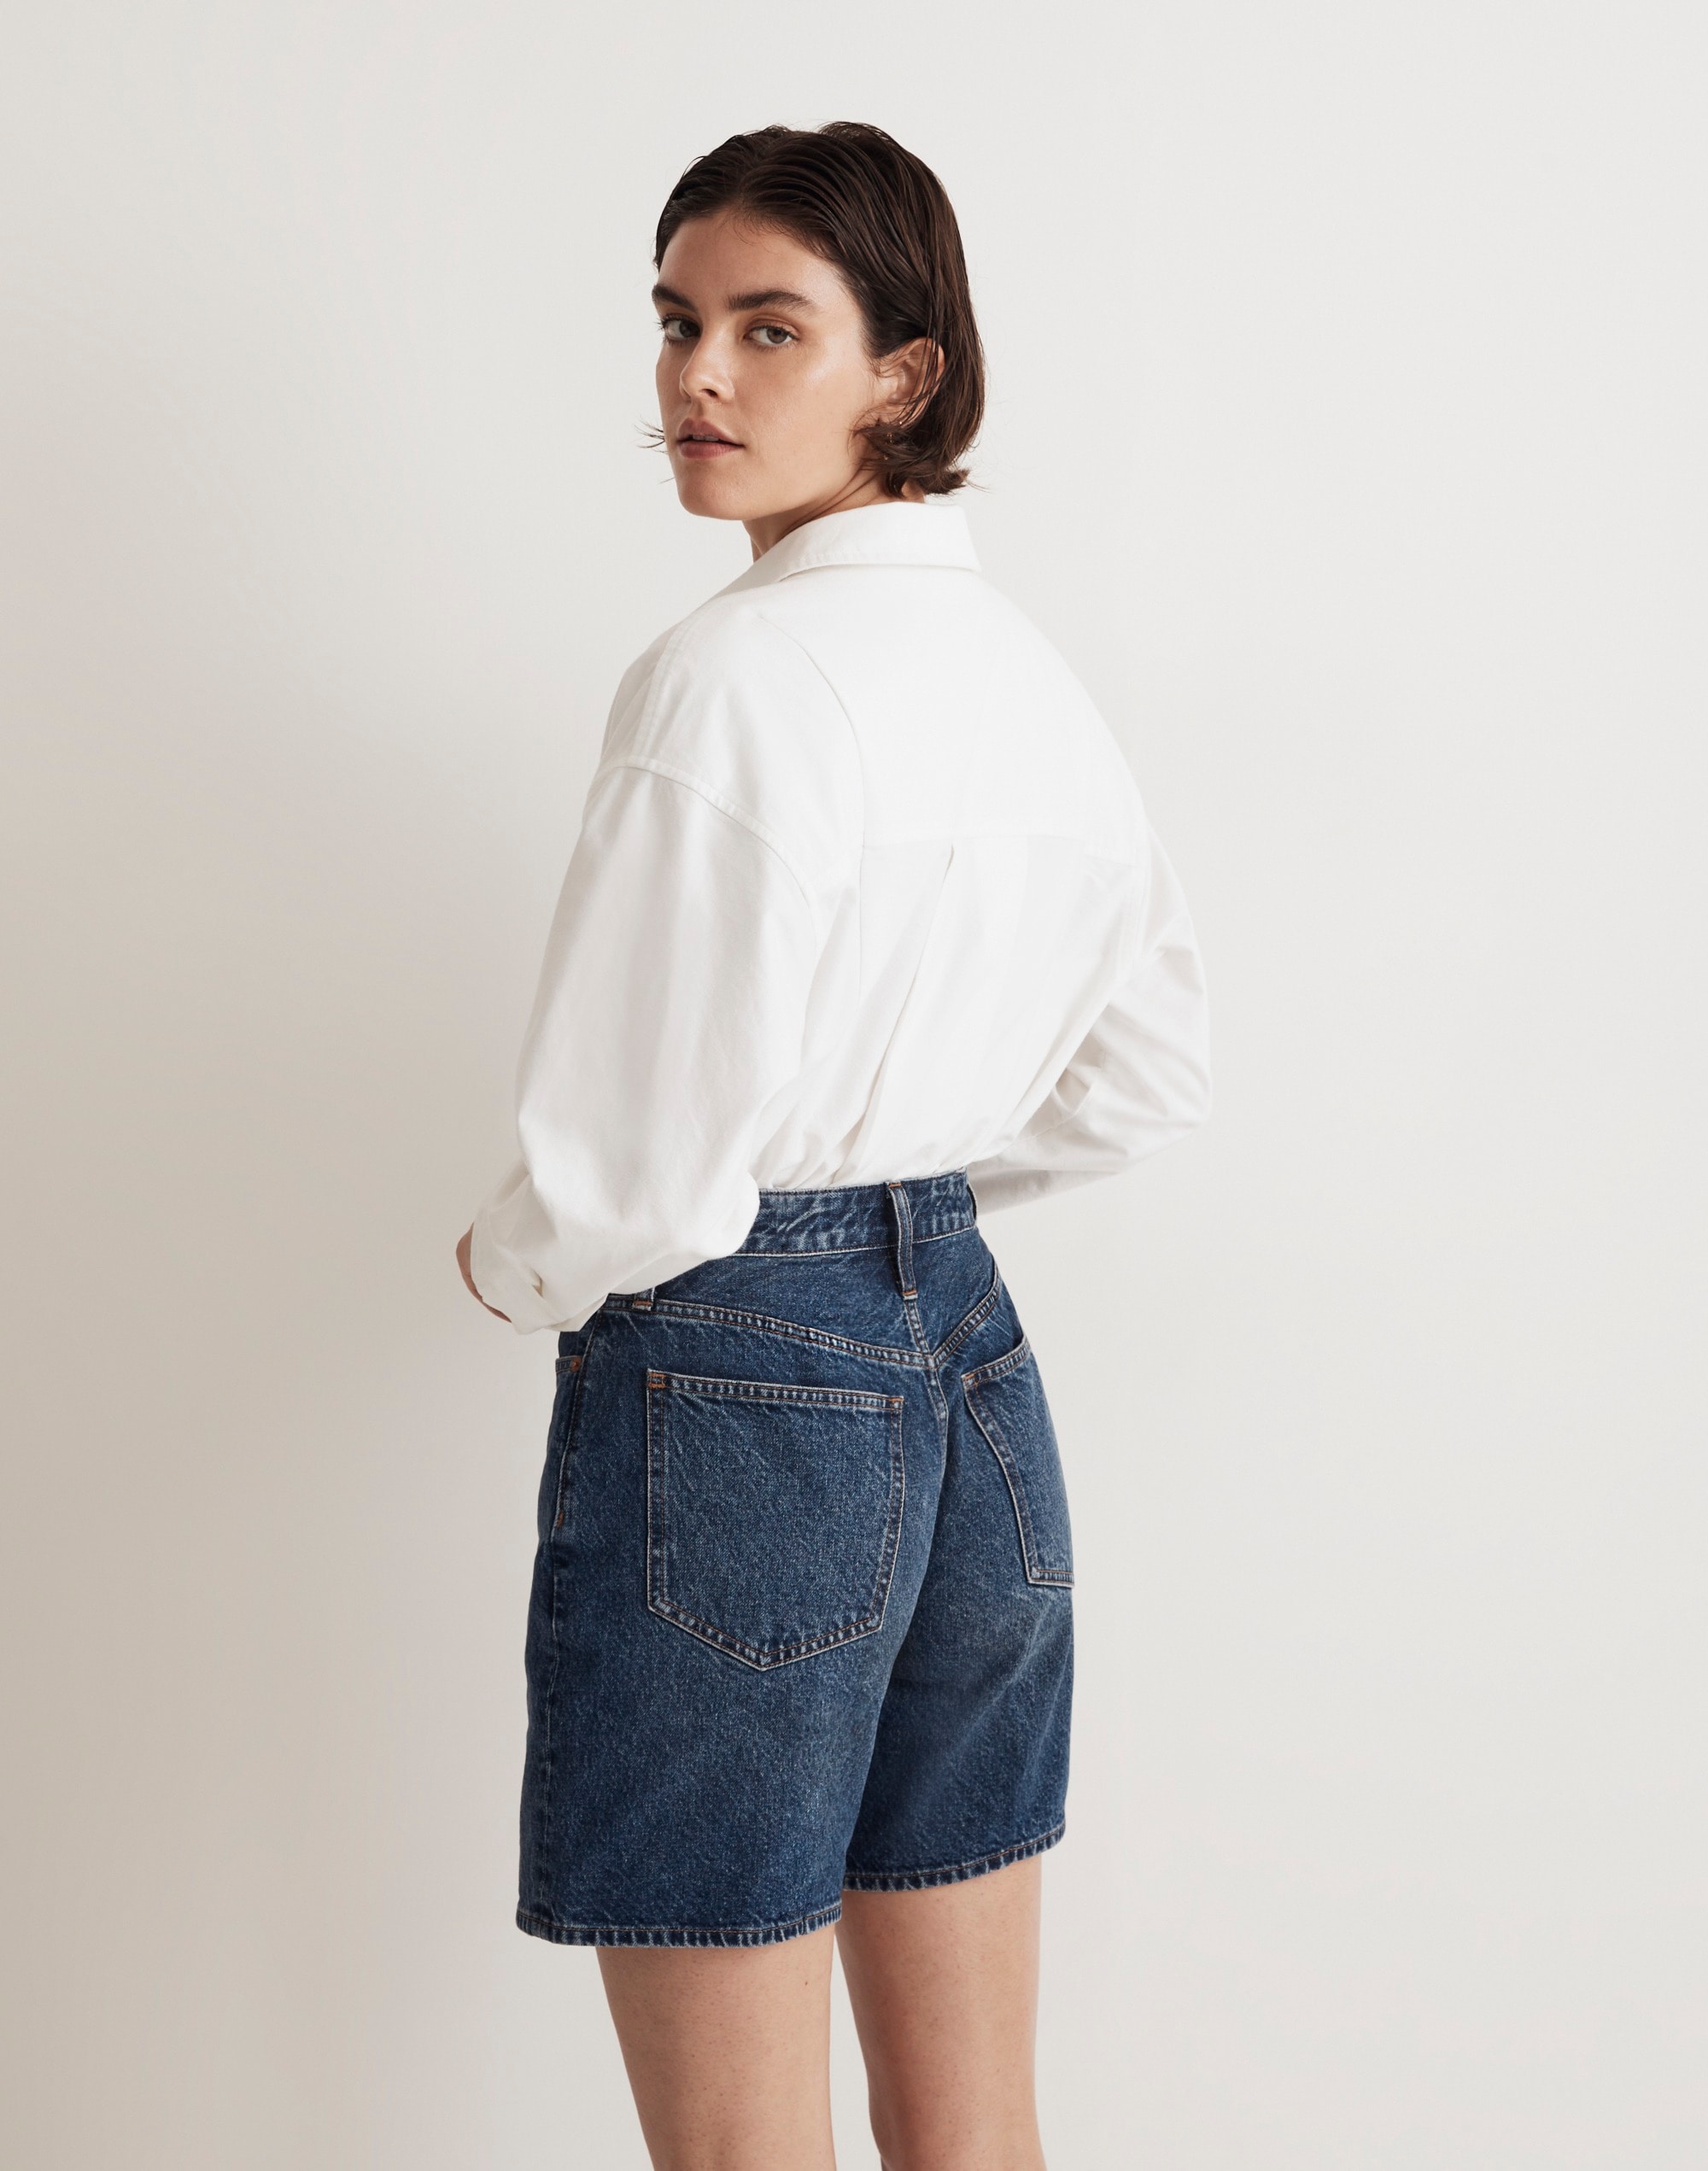 Baggy Jean Shorts in Valmont Wash